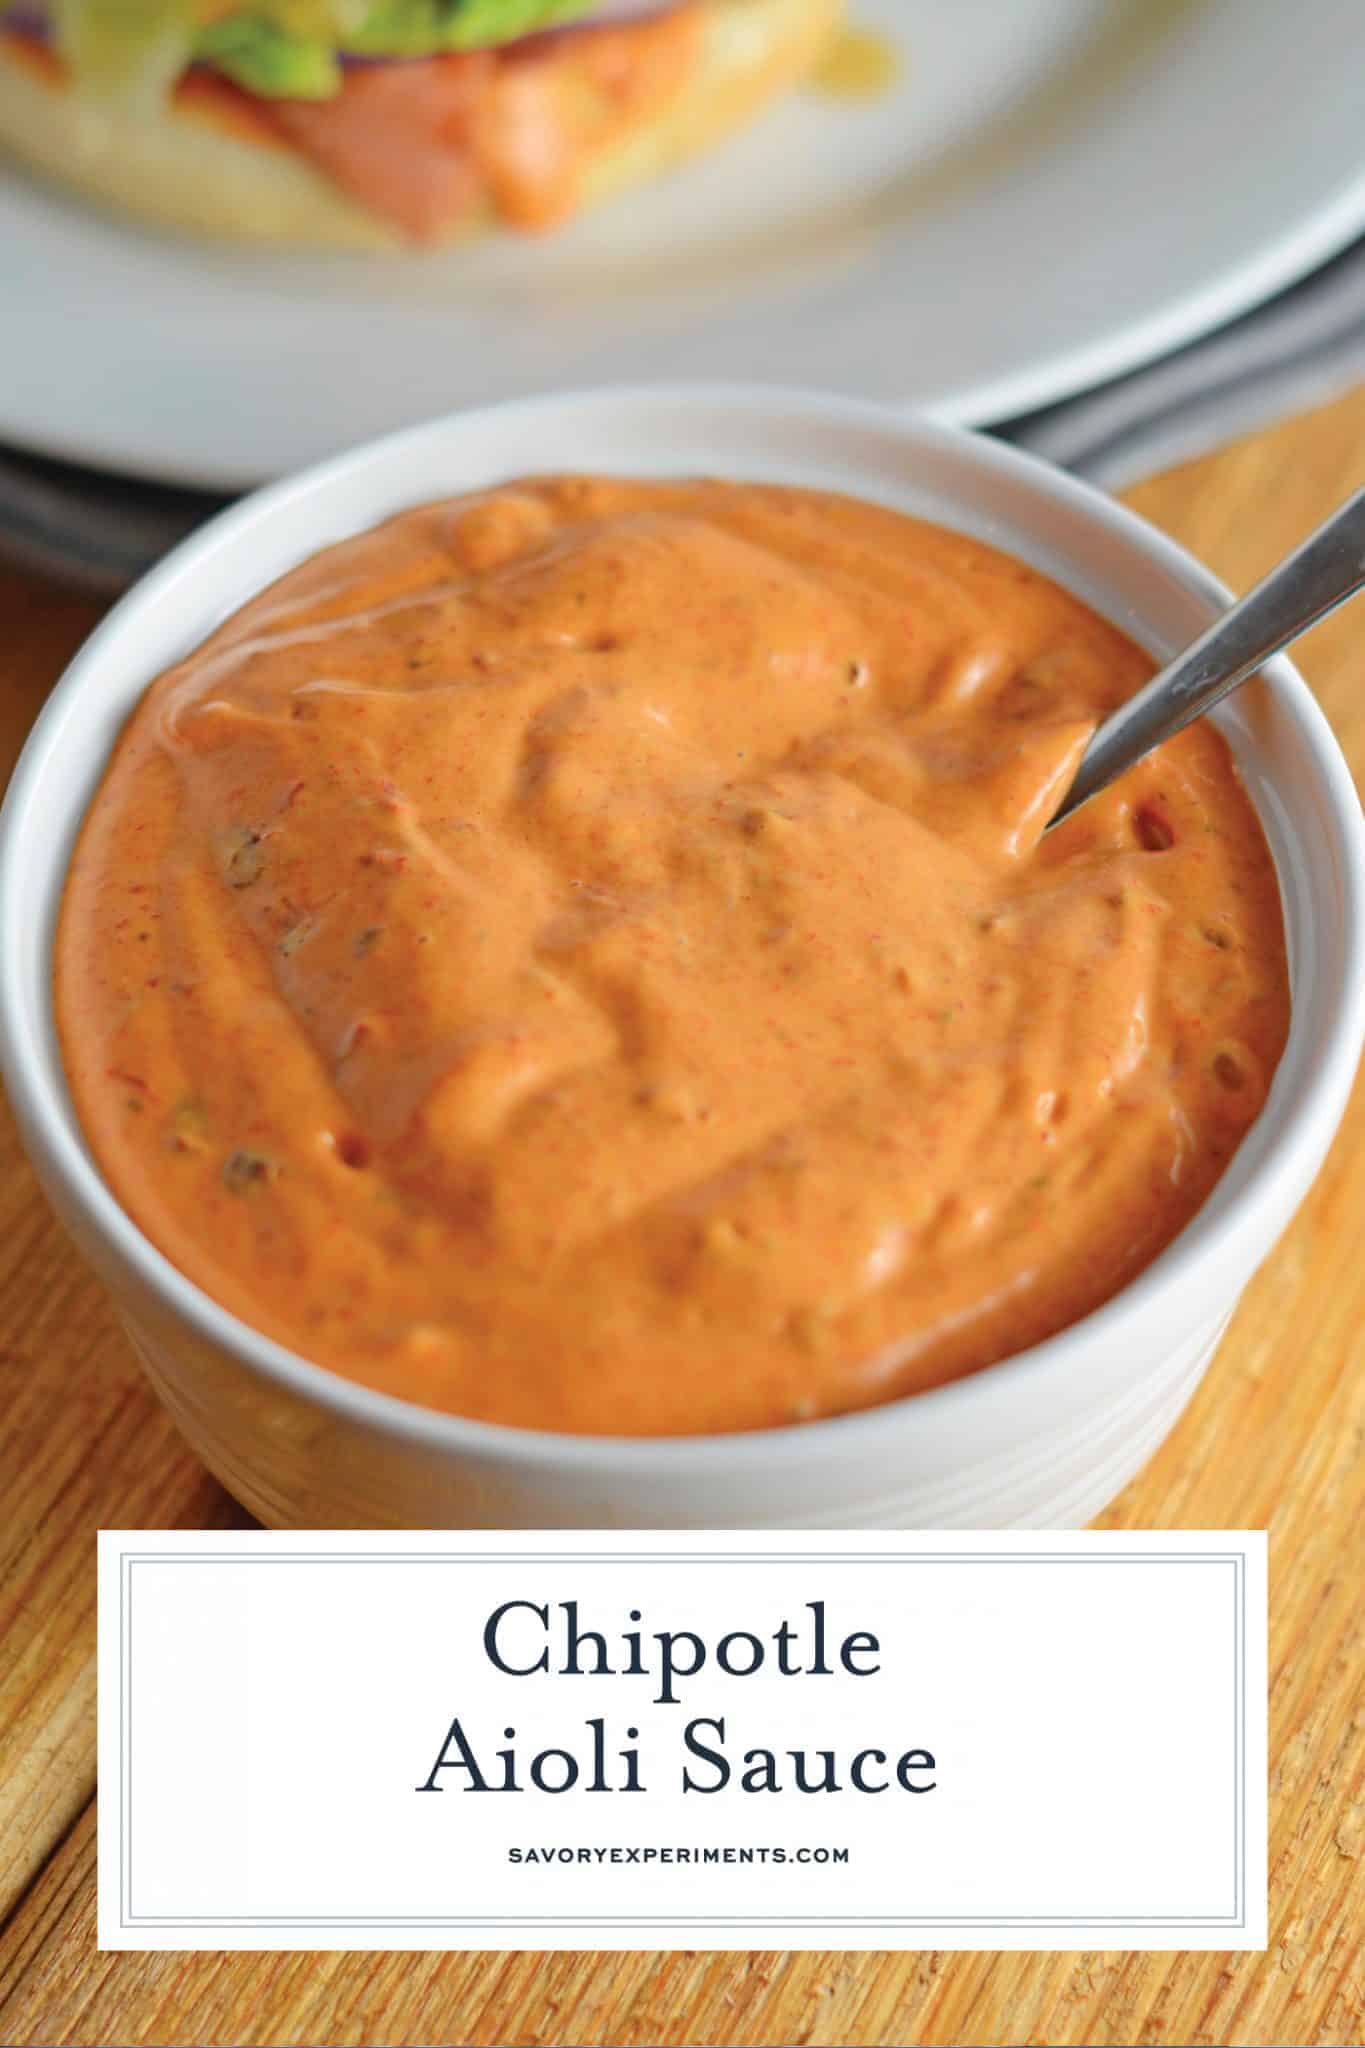 Creamy Chipotle Aioli is a quick and zesty sauce perfect for dipping or spreading on sandwiches. An easy sauce perfect for any meal! #aiolirecipe #chipotleaioli www.savoryexperiments.com